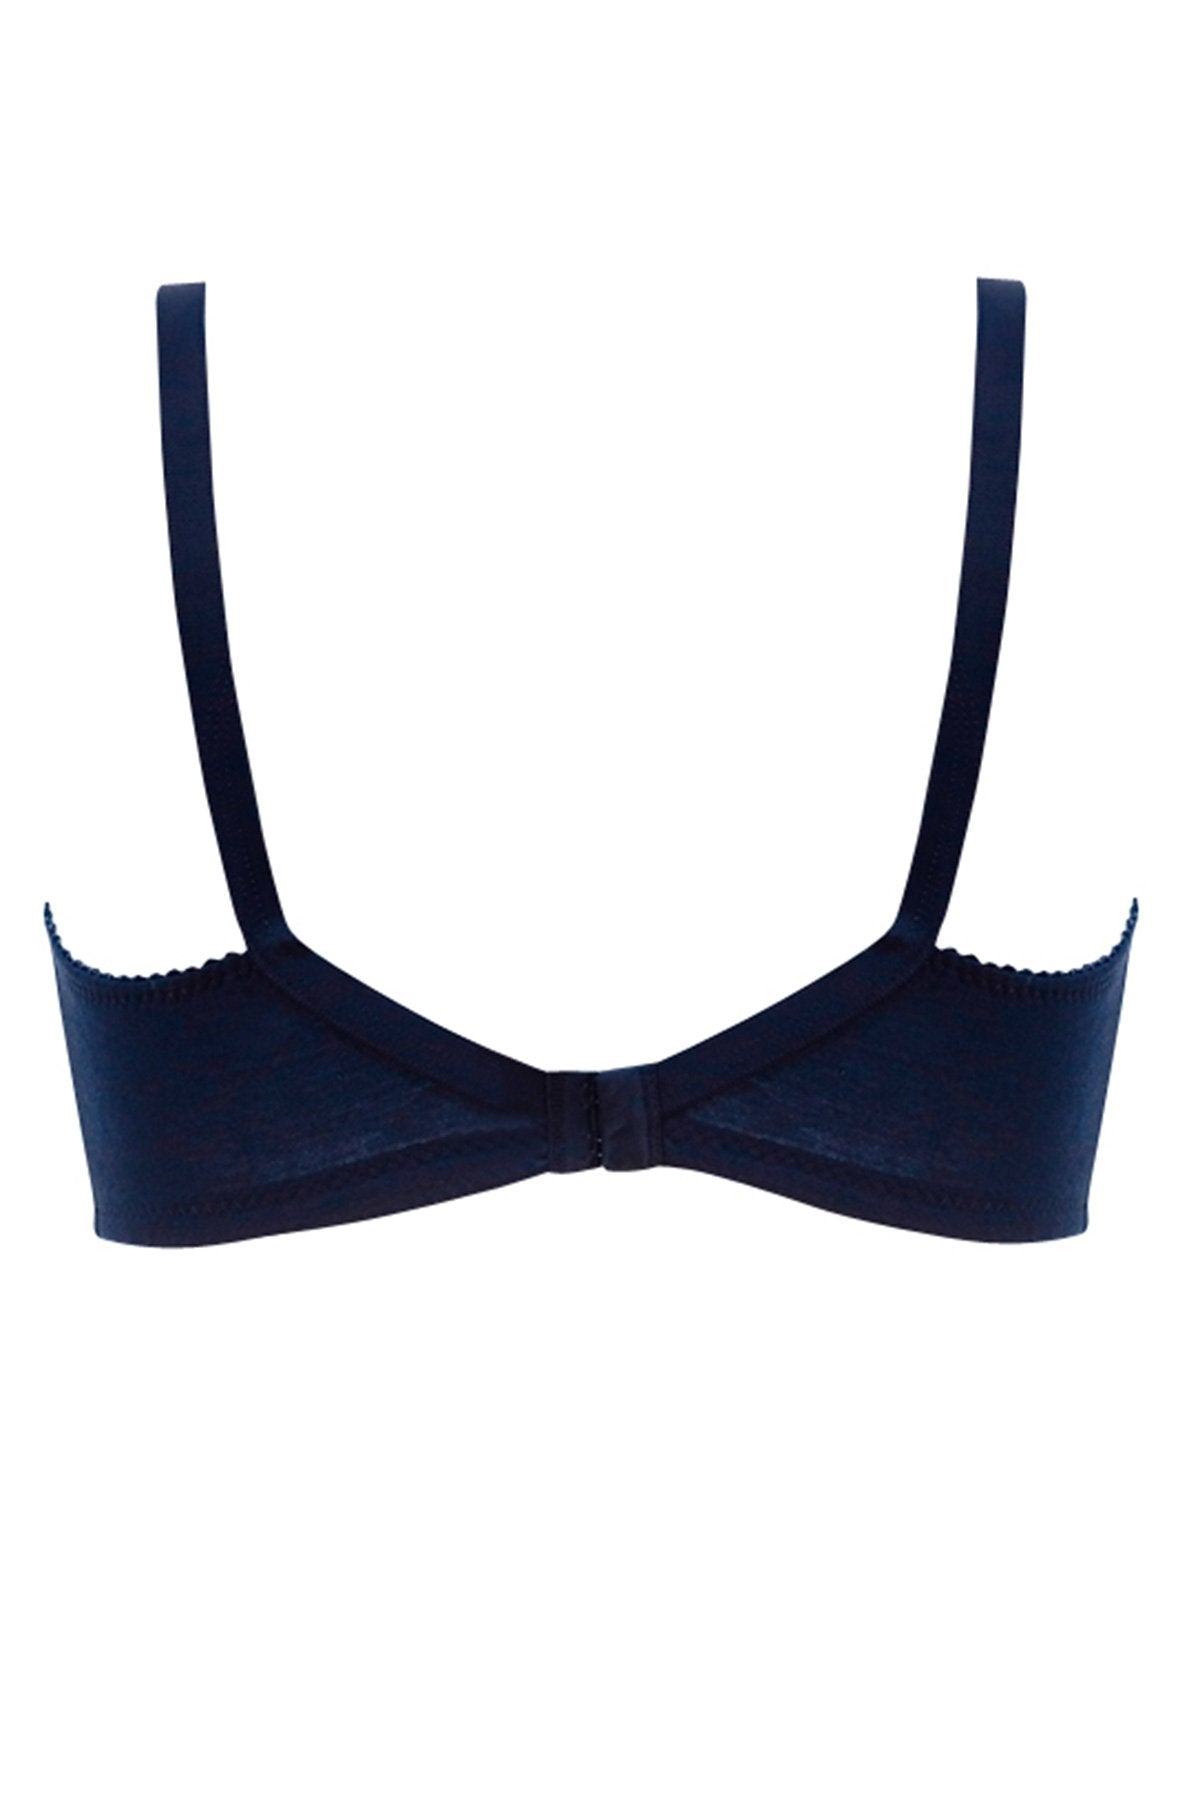 BLS - Clara Non Wired And Non Padded Cotton Bra - Navy Blue